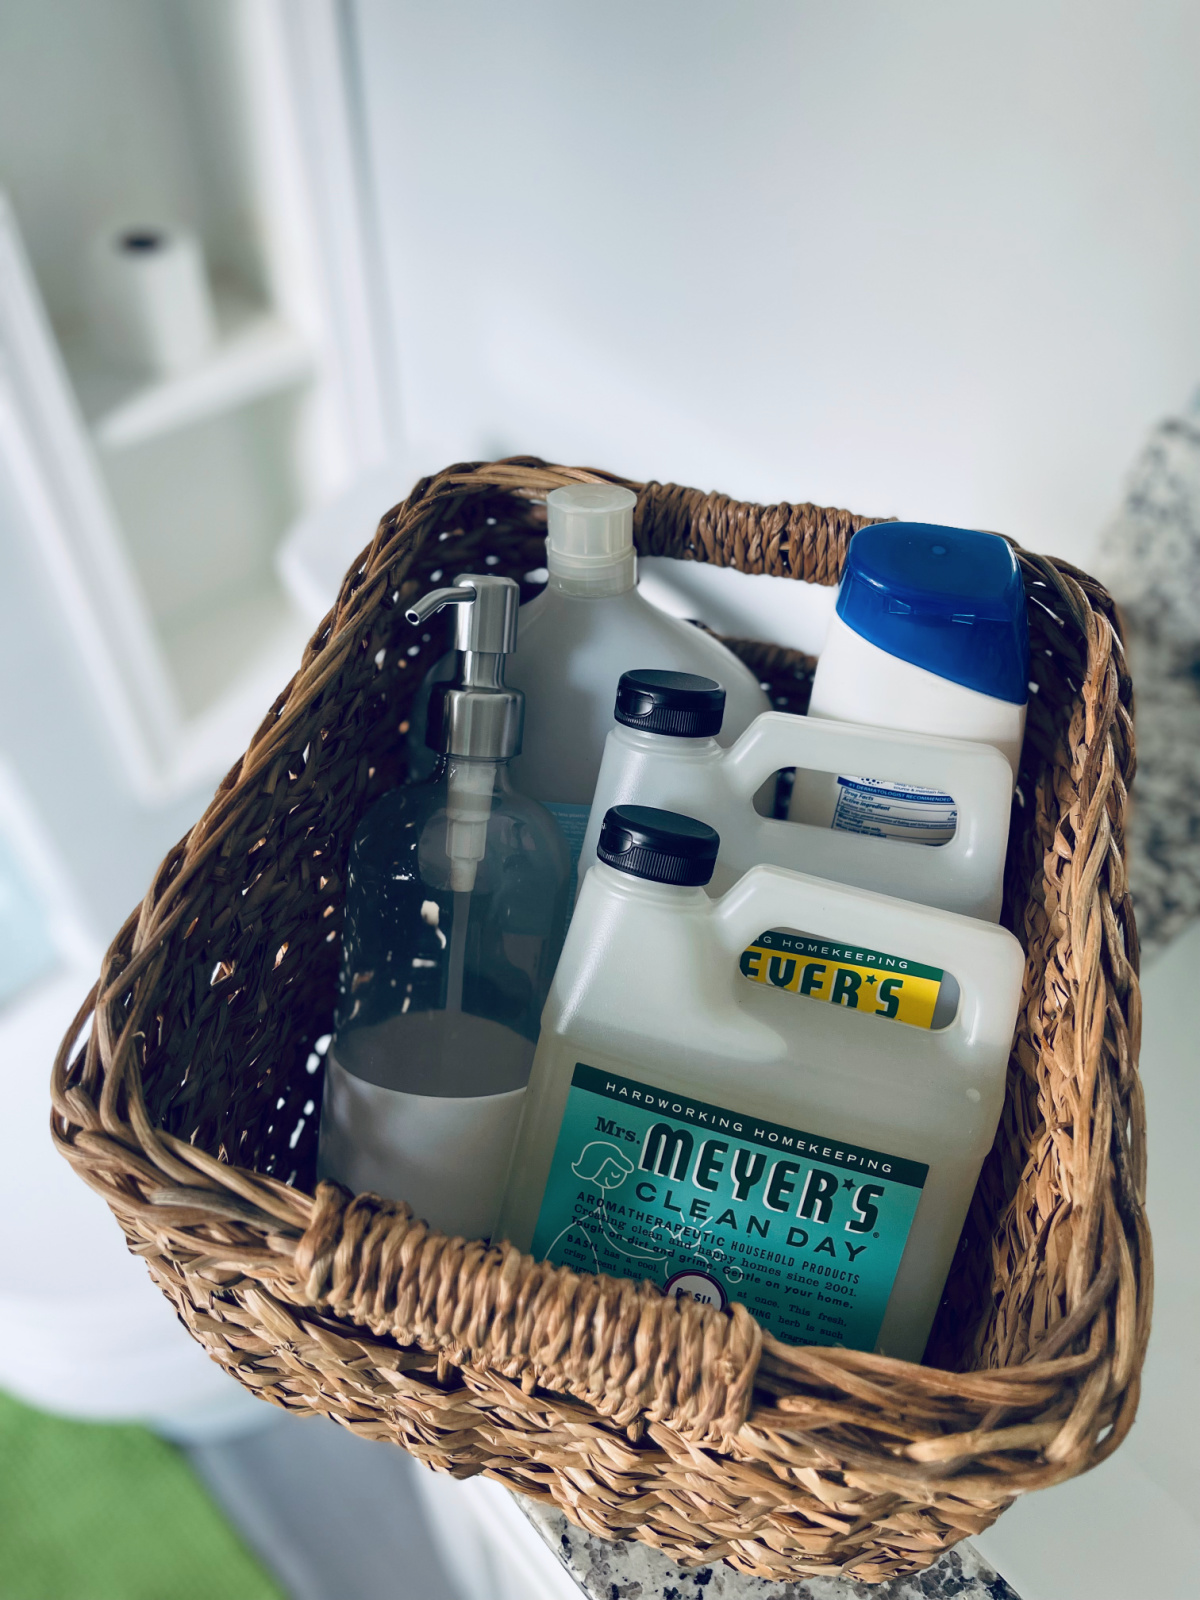 basket with Mrs. Meyer's hand soap refills and glass soap dispenser in bathroom.